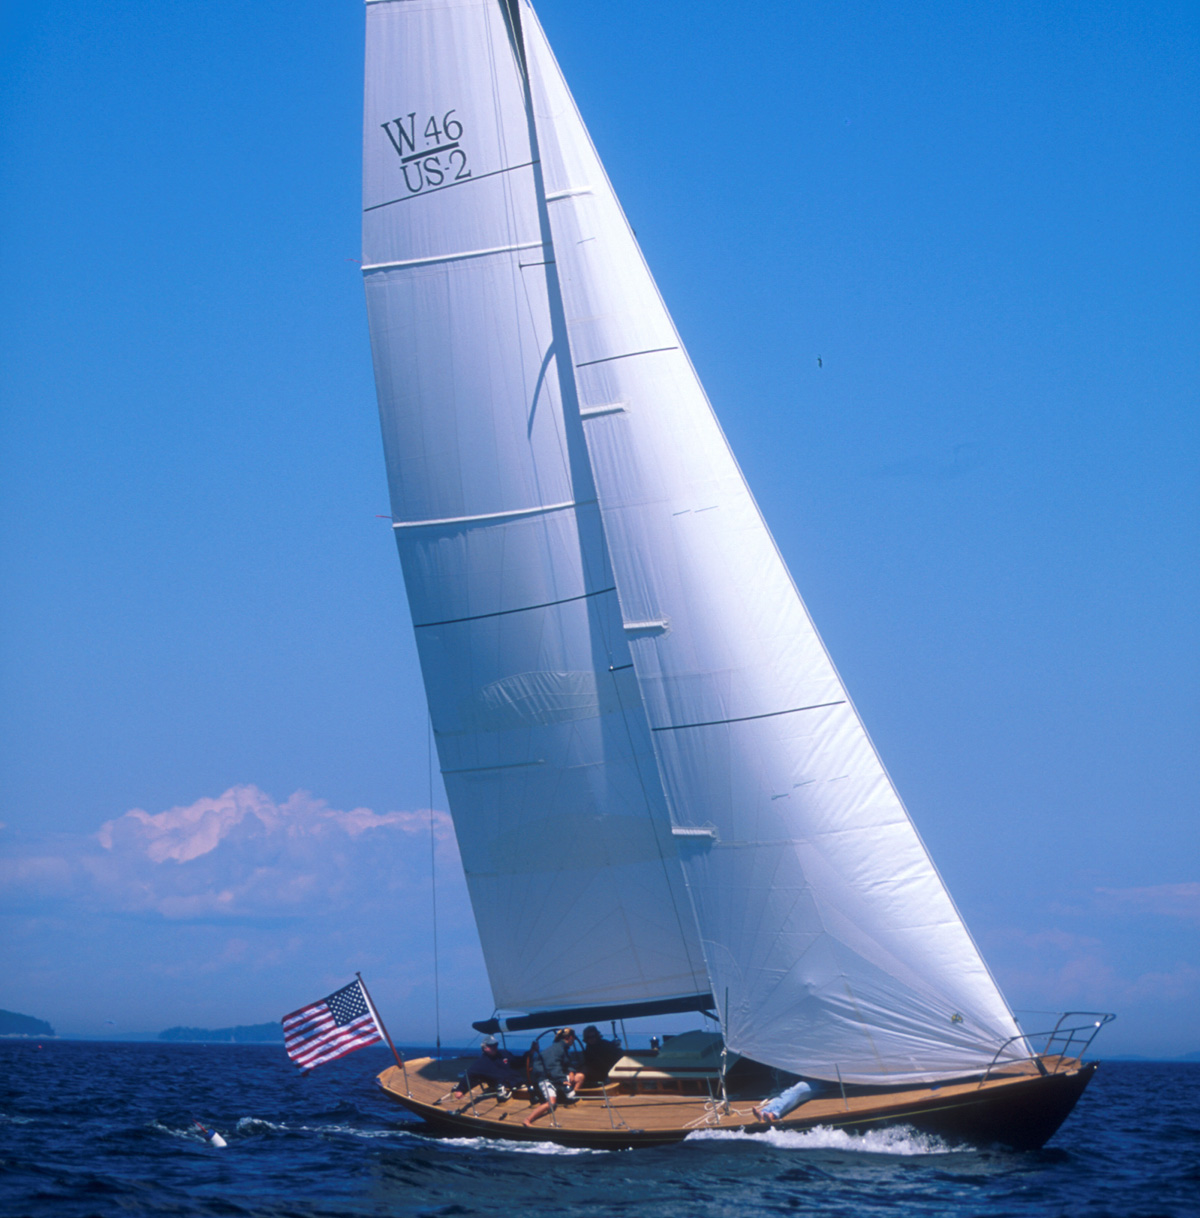 Details about   PINECAR SAILBOAT RACER DRY TRANSFER VIKING SR486 MADE IN U.S.A. 